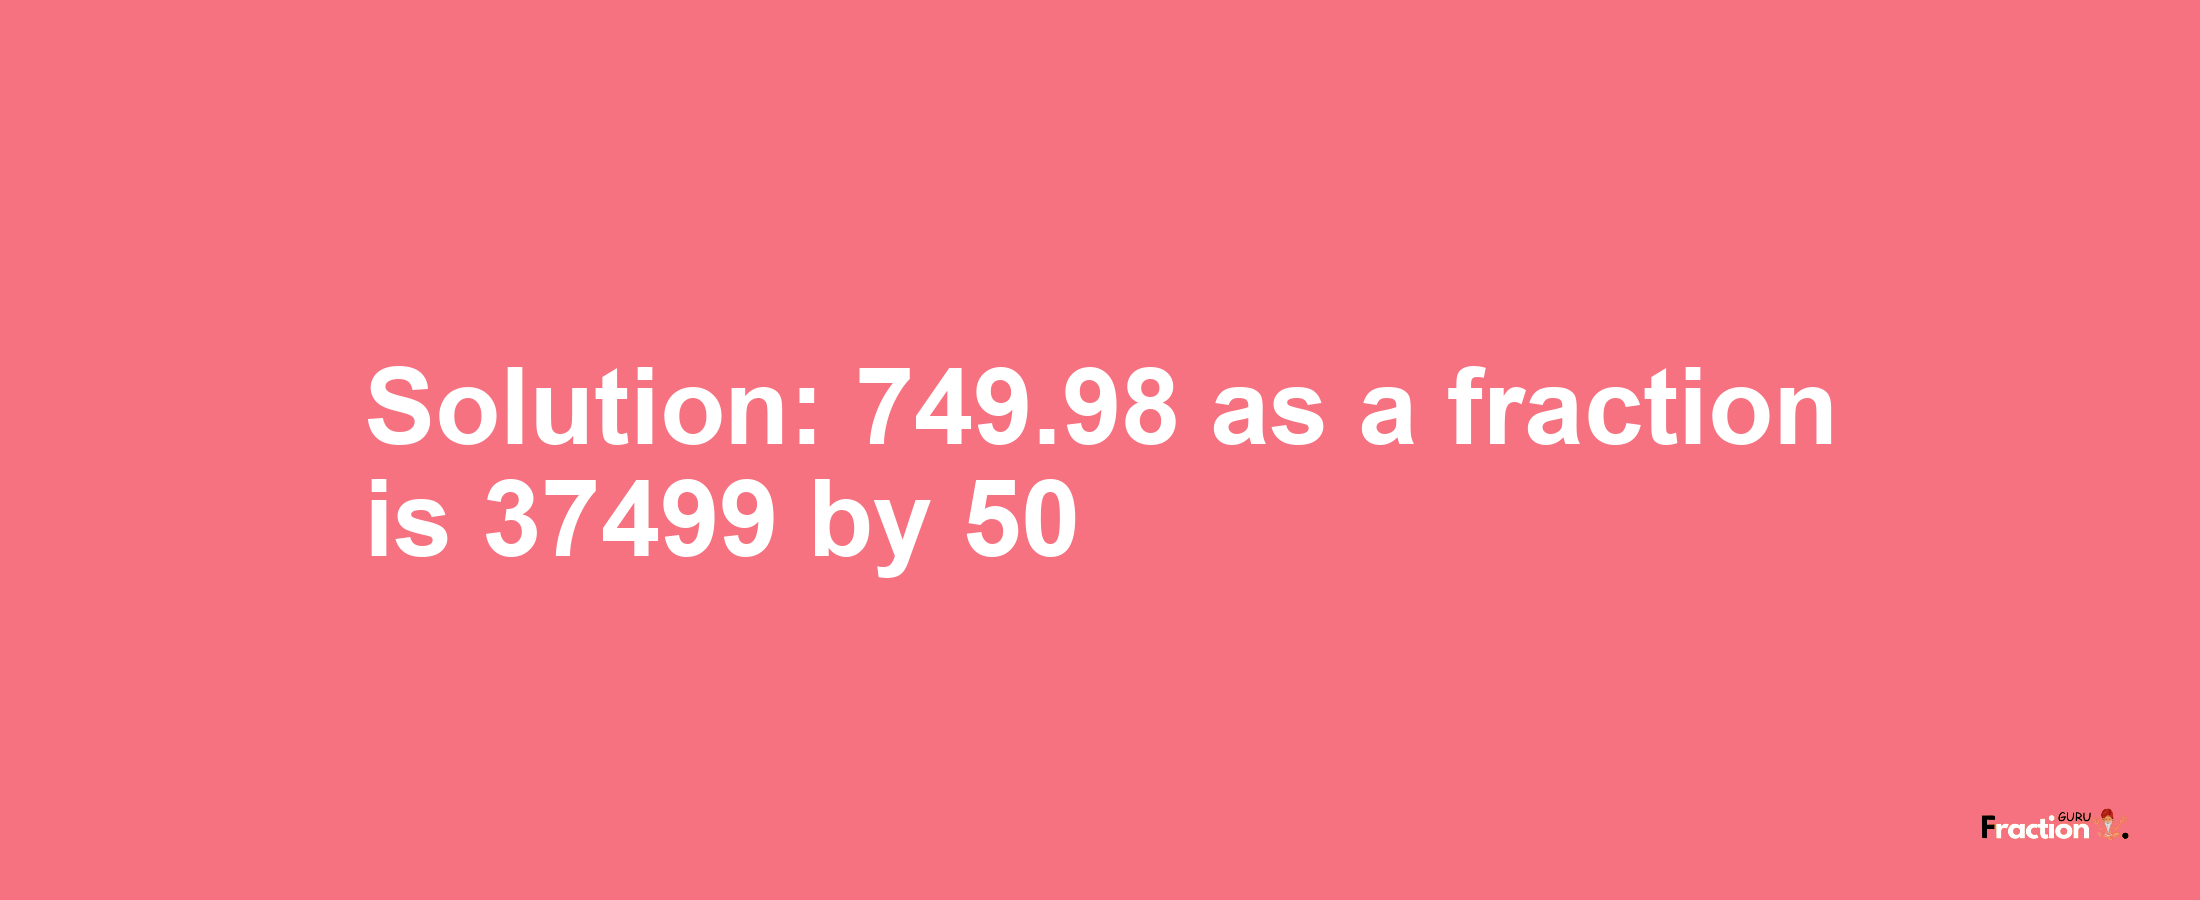 Solution:749.98 as a fraction is 37499/50